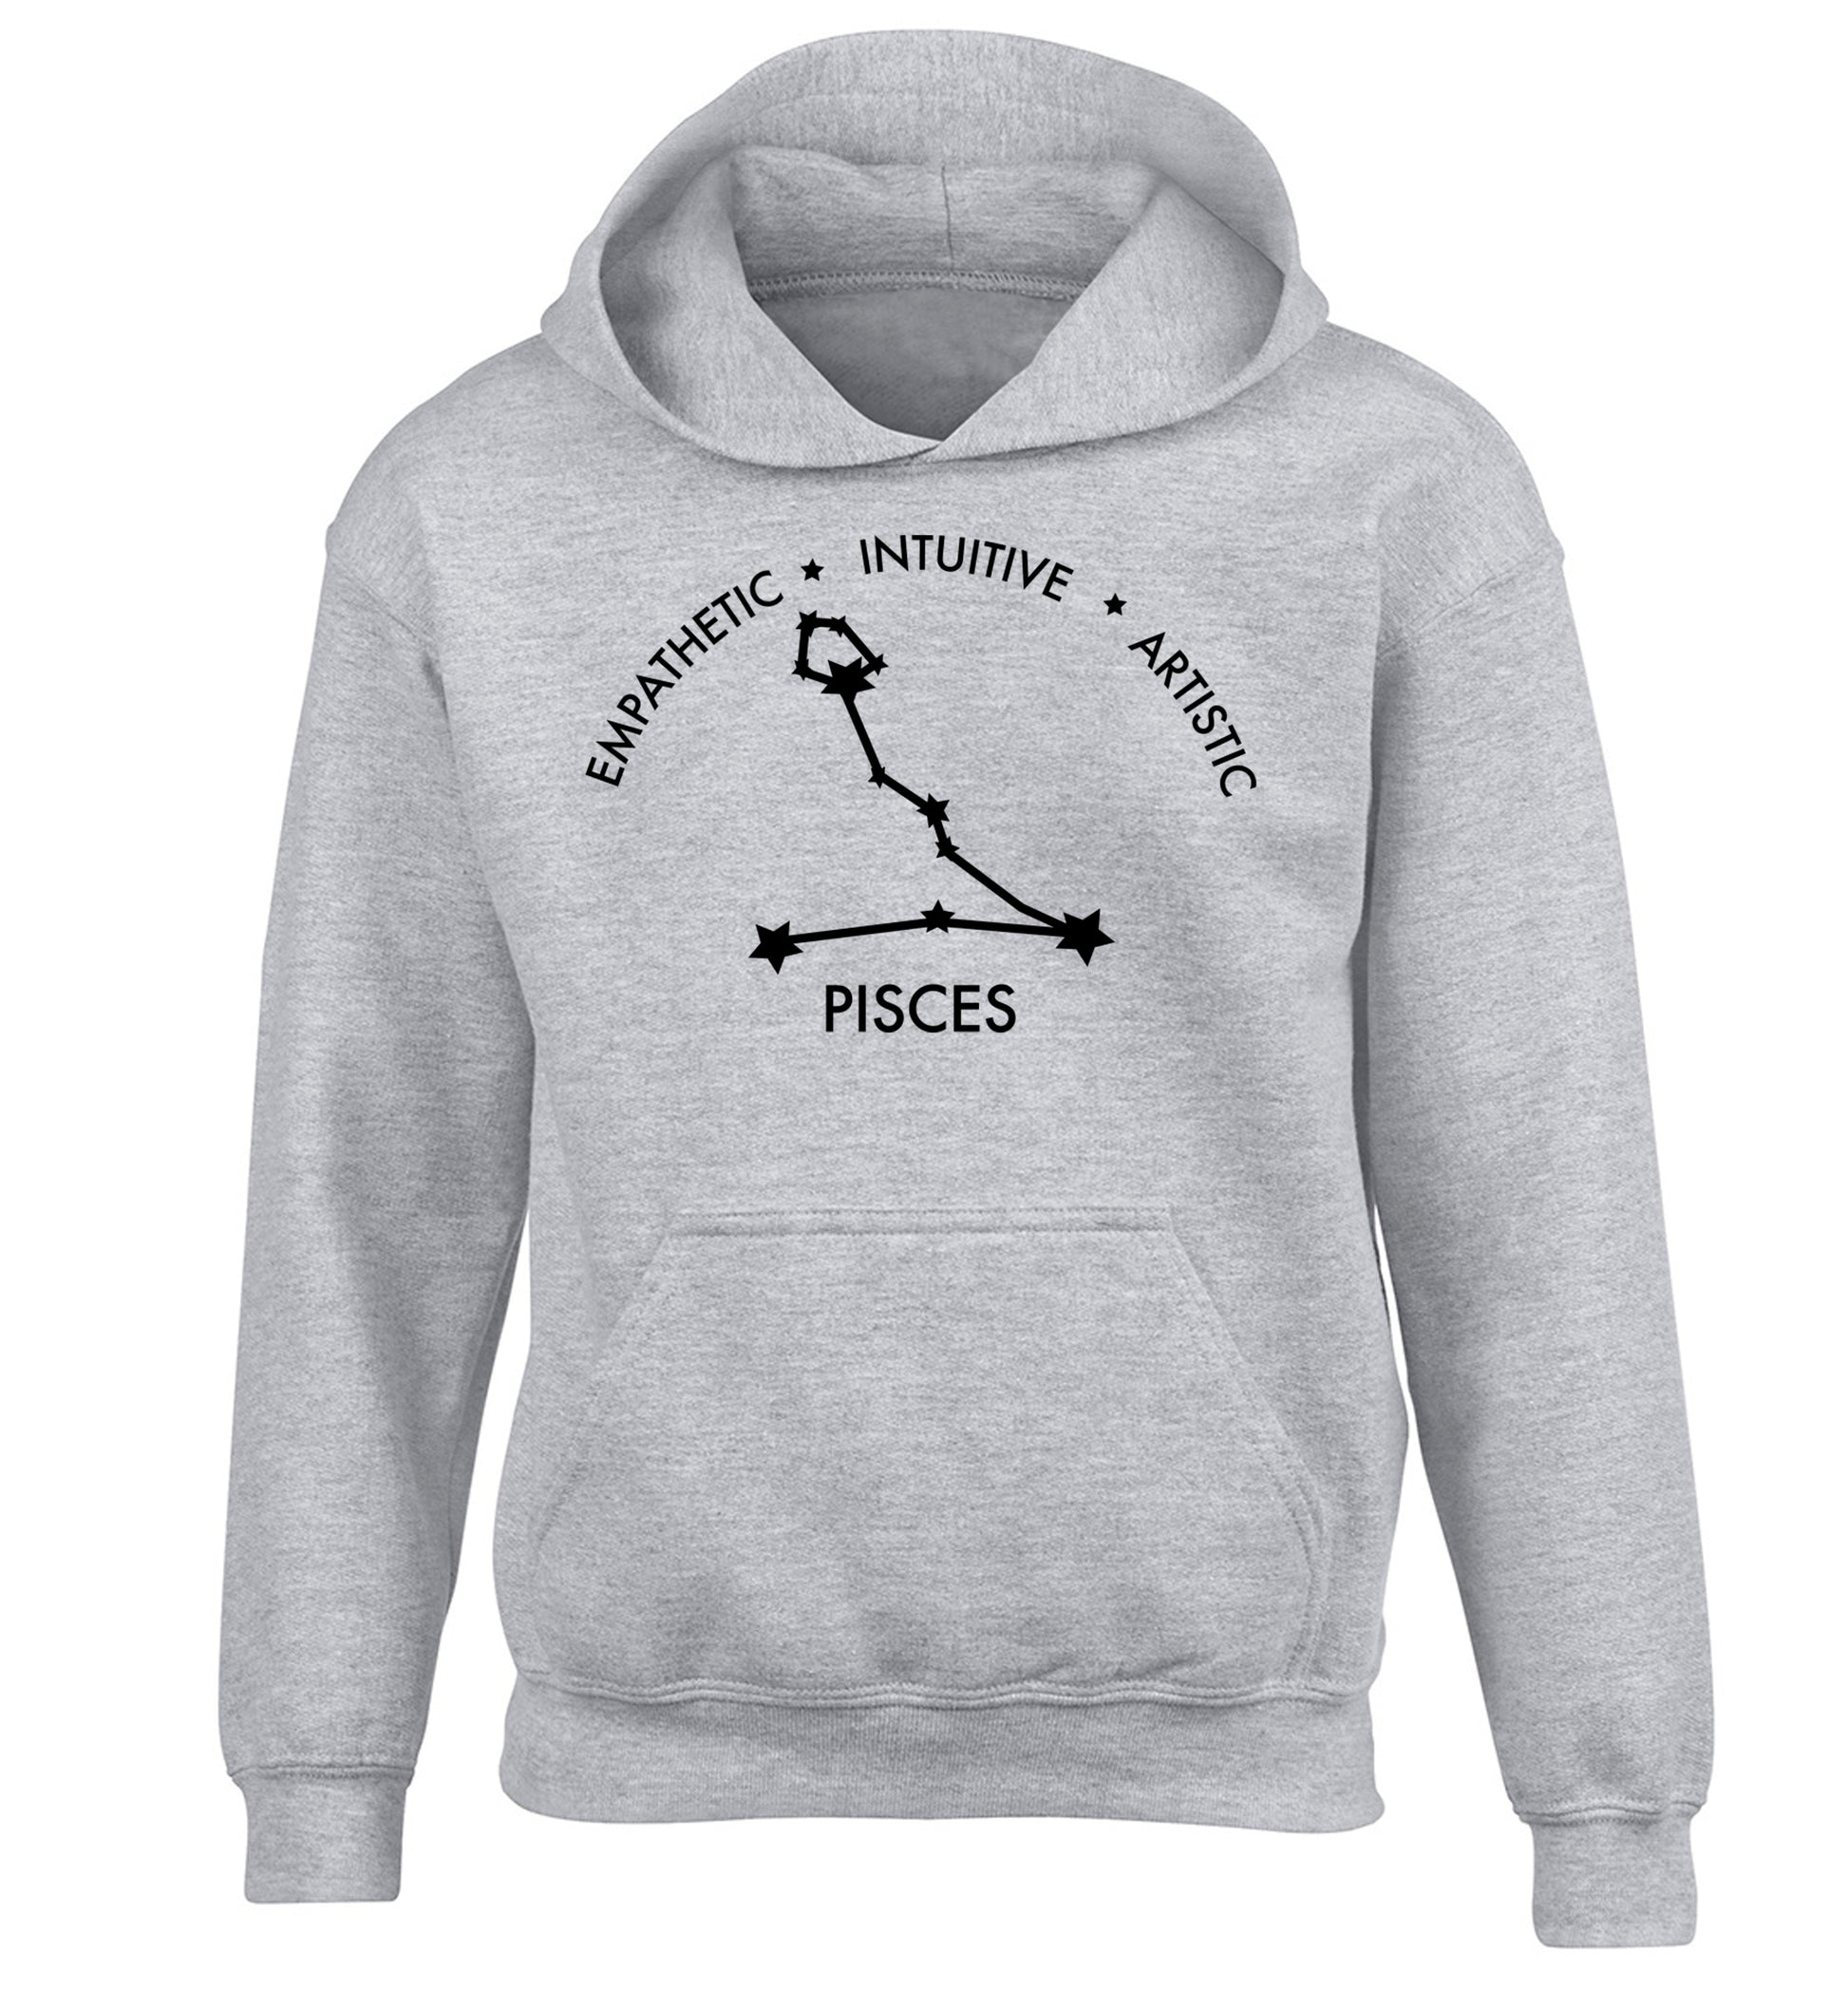 Capricorn: Ambitious | Patient | Gracious children's grey hoodie 12-13 Years